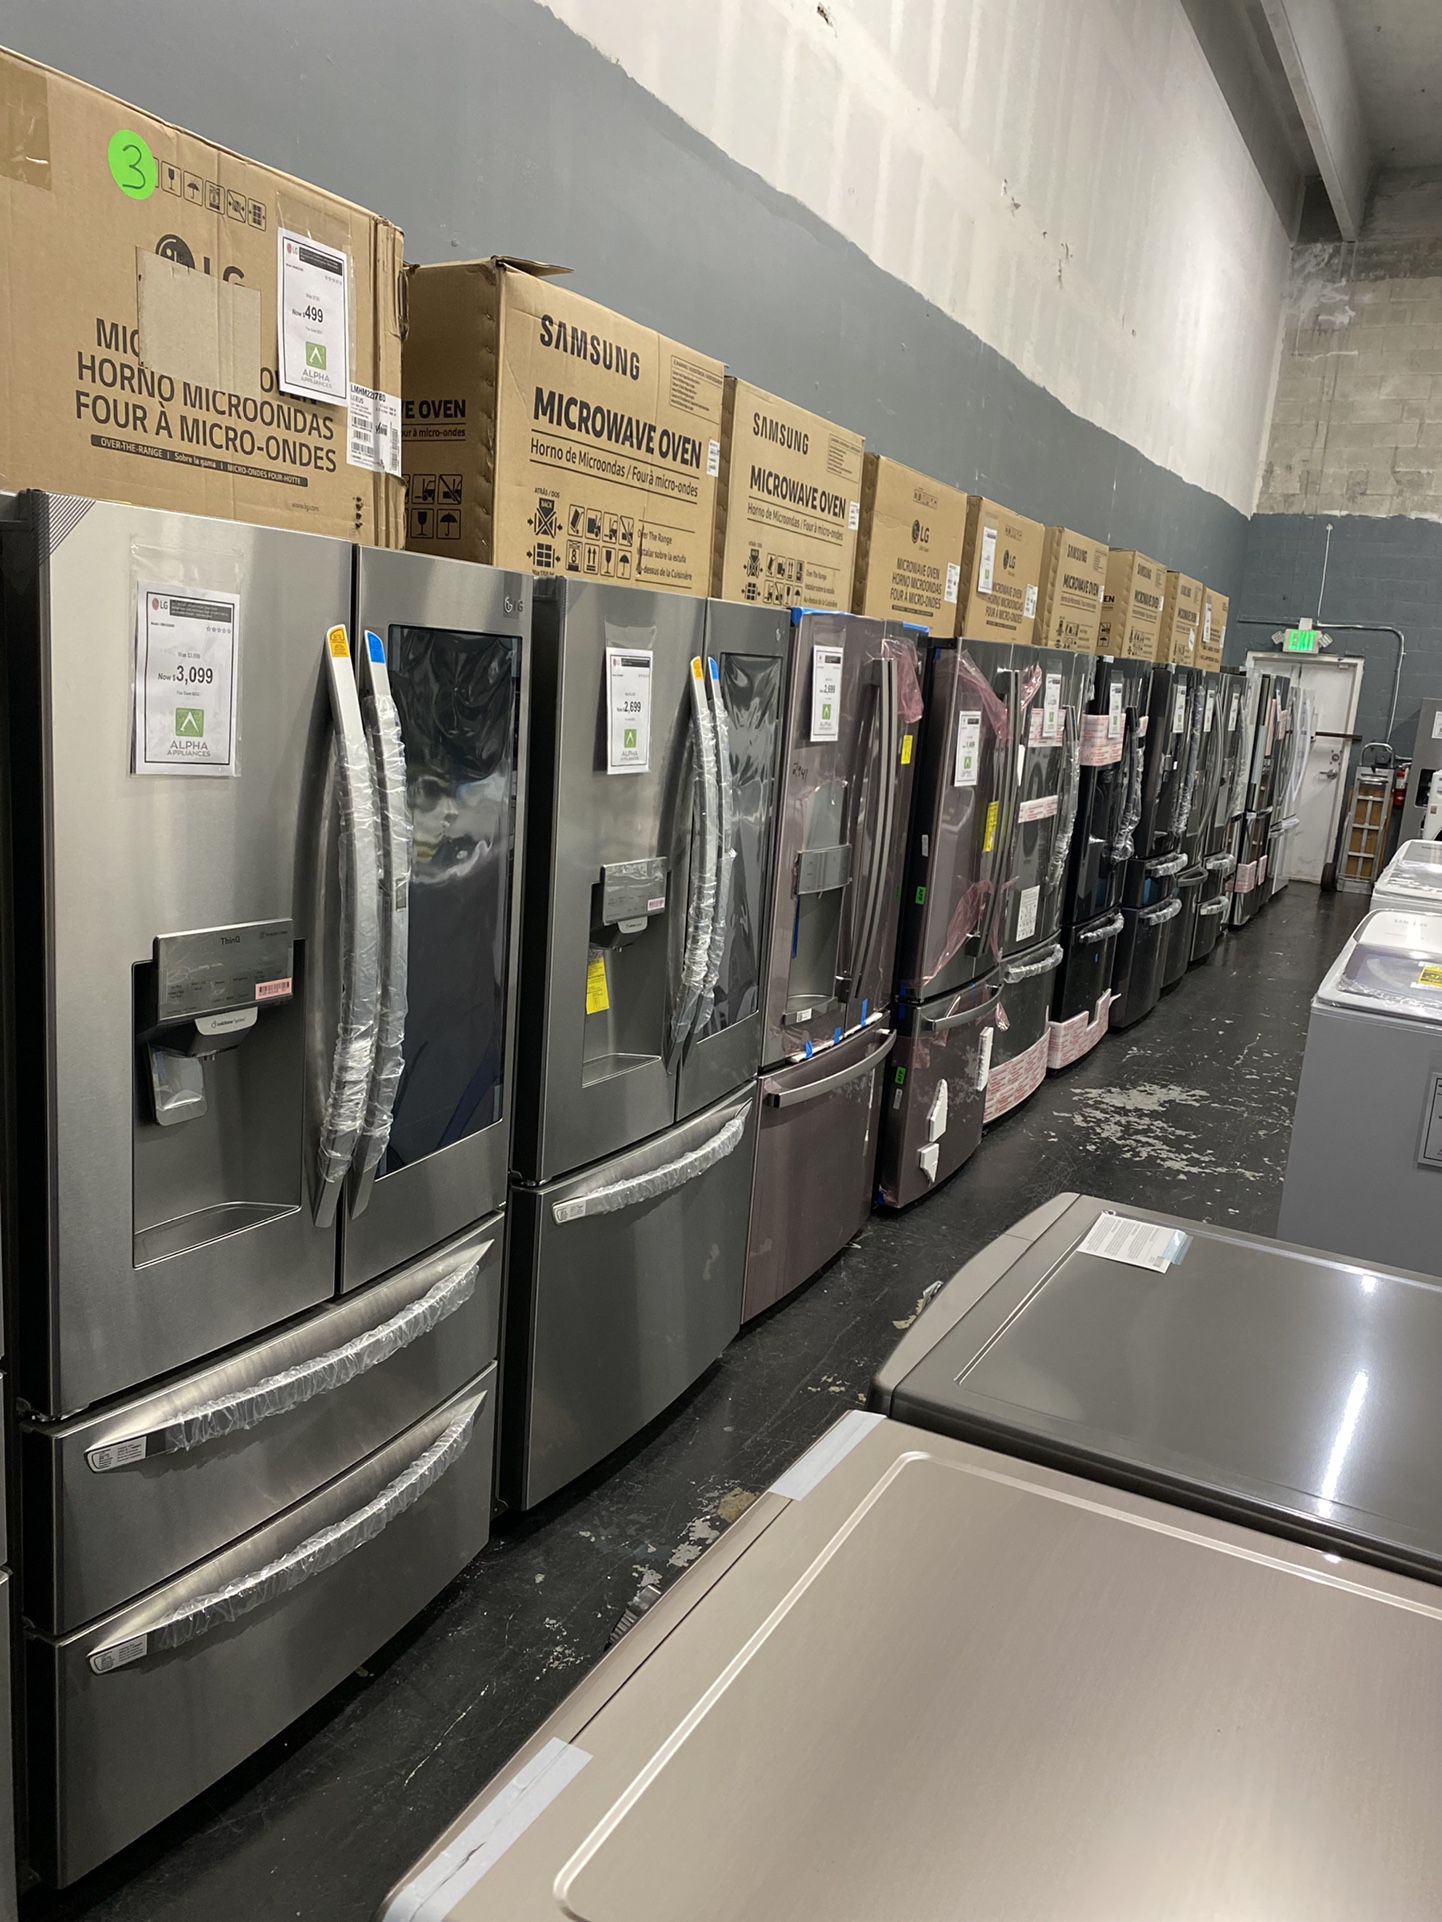 Appliances, New, New with scratch or dent, Refrigerator, Stove, Microwave, Dishwasher, Washer, Dryer, Range.  No Credit Needed $39 down payment Lavado